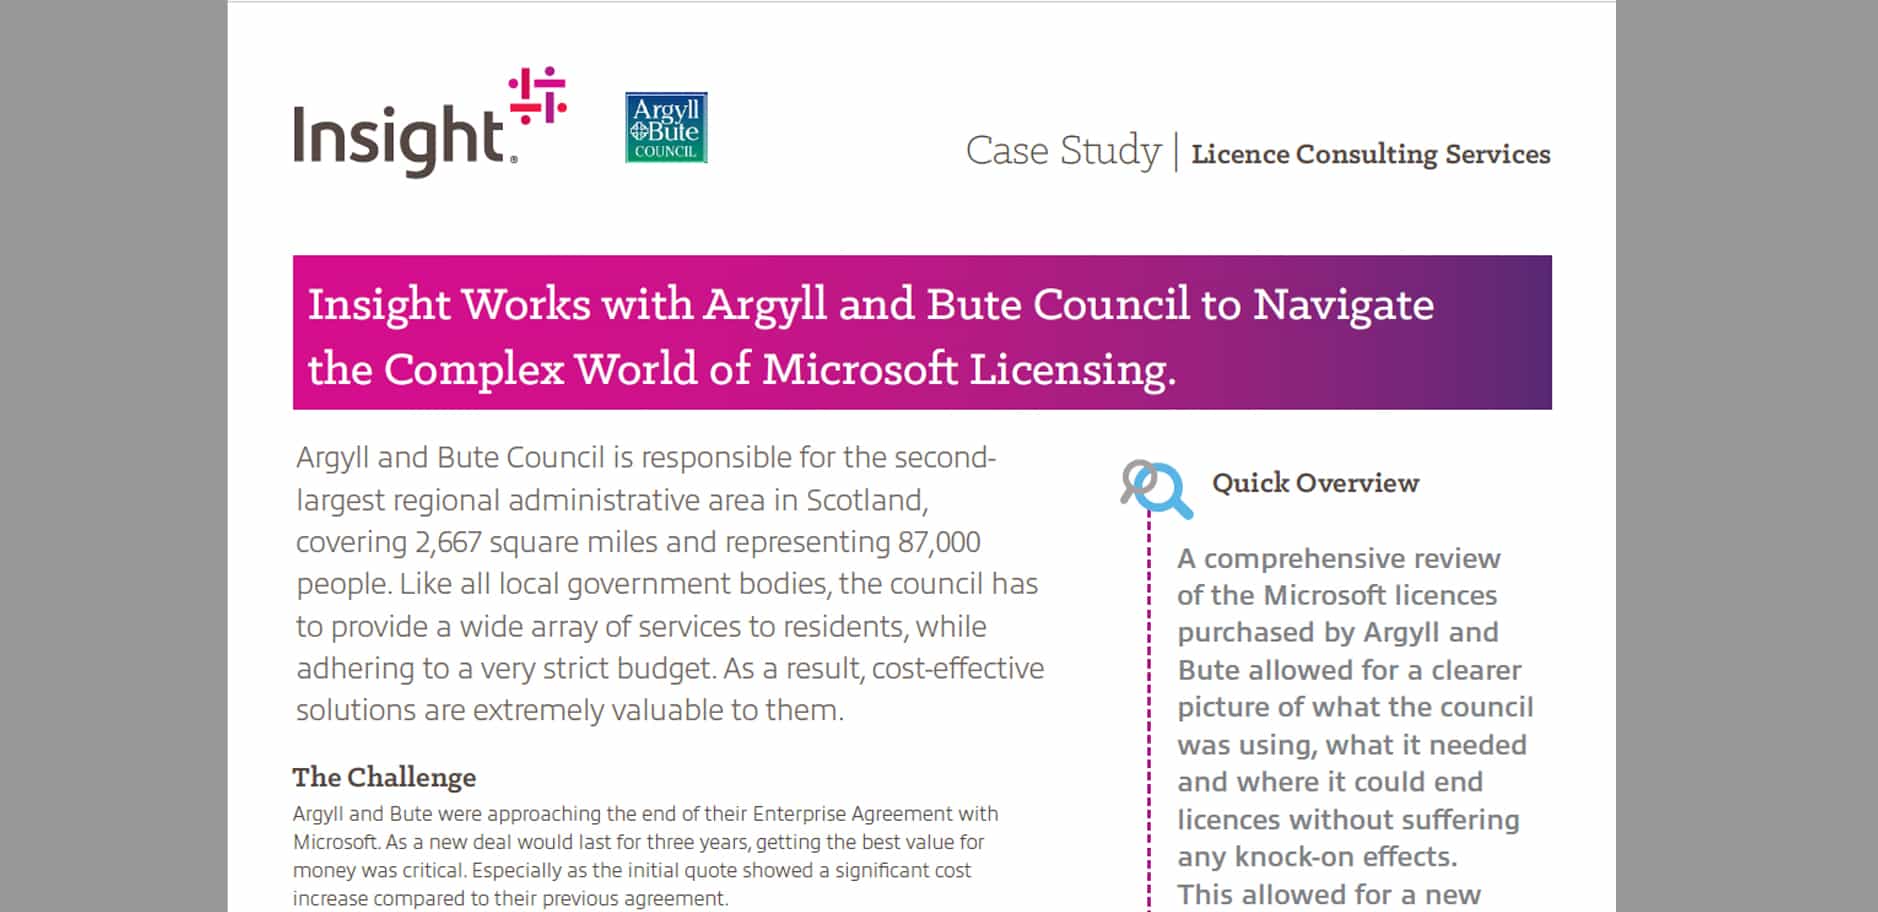 Article Argyll & Bute Council: Navigating the complex world of Microsoft Licensing Image